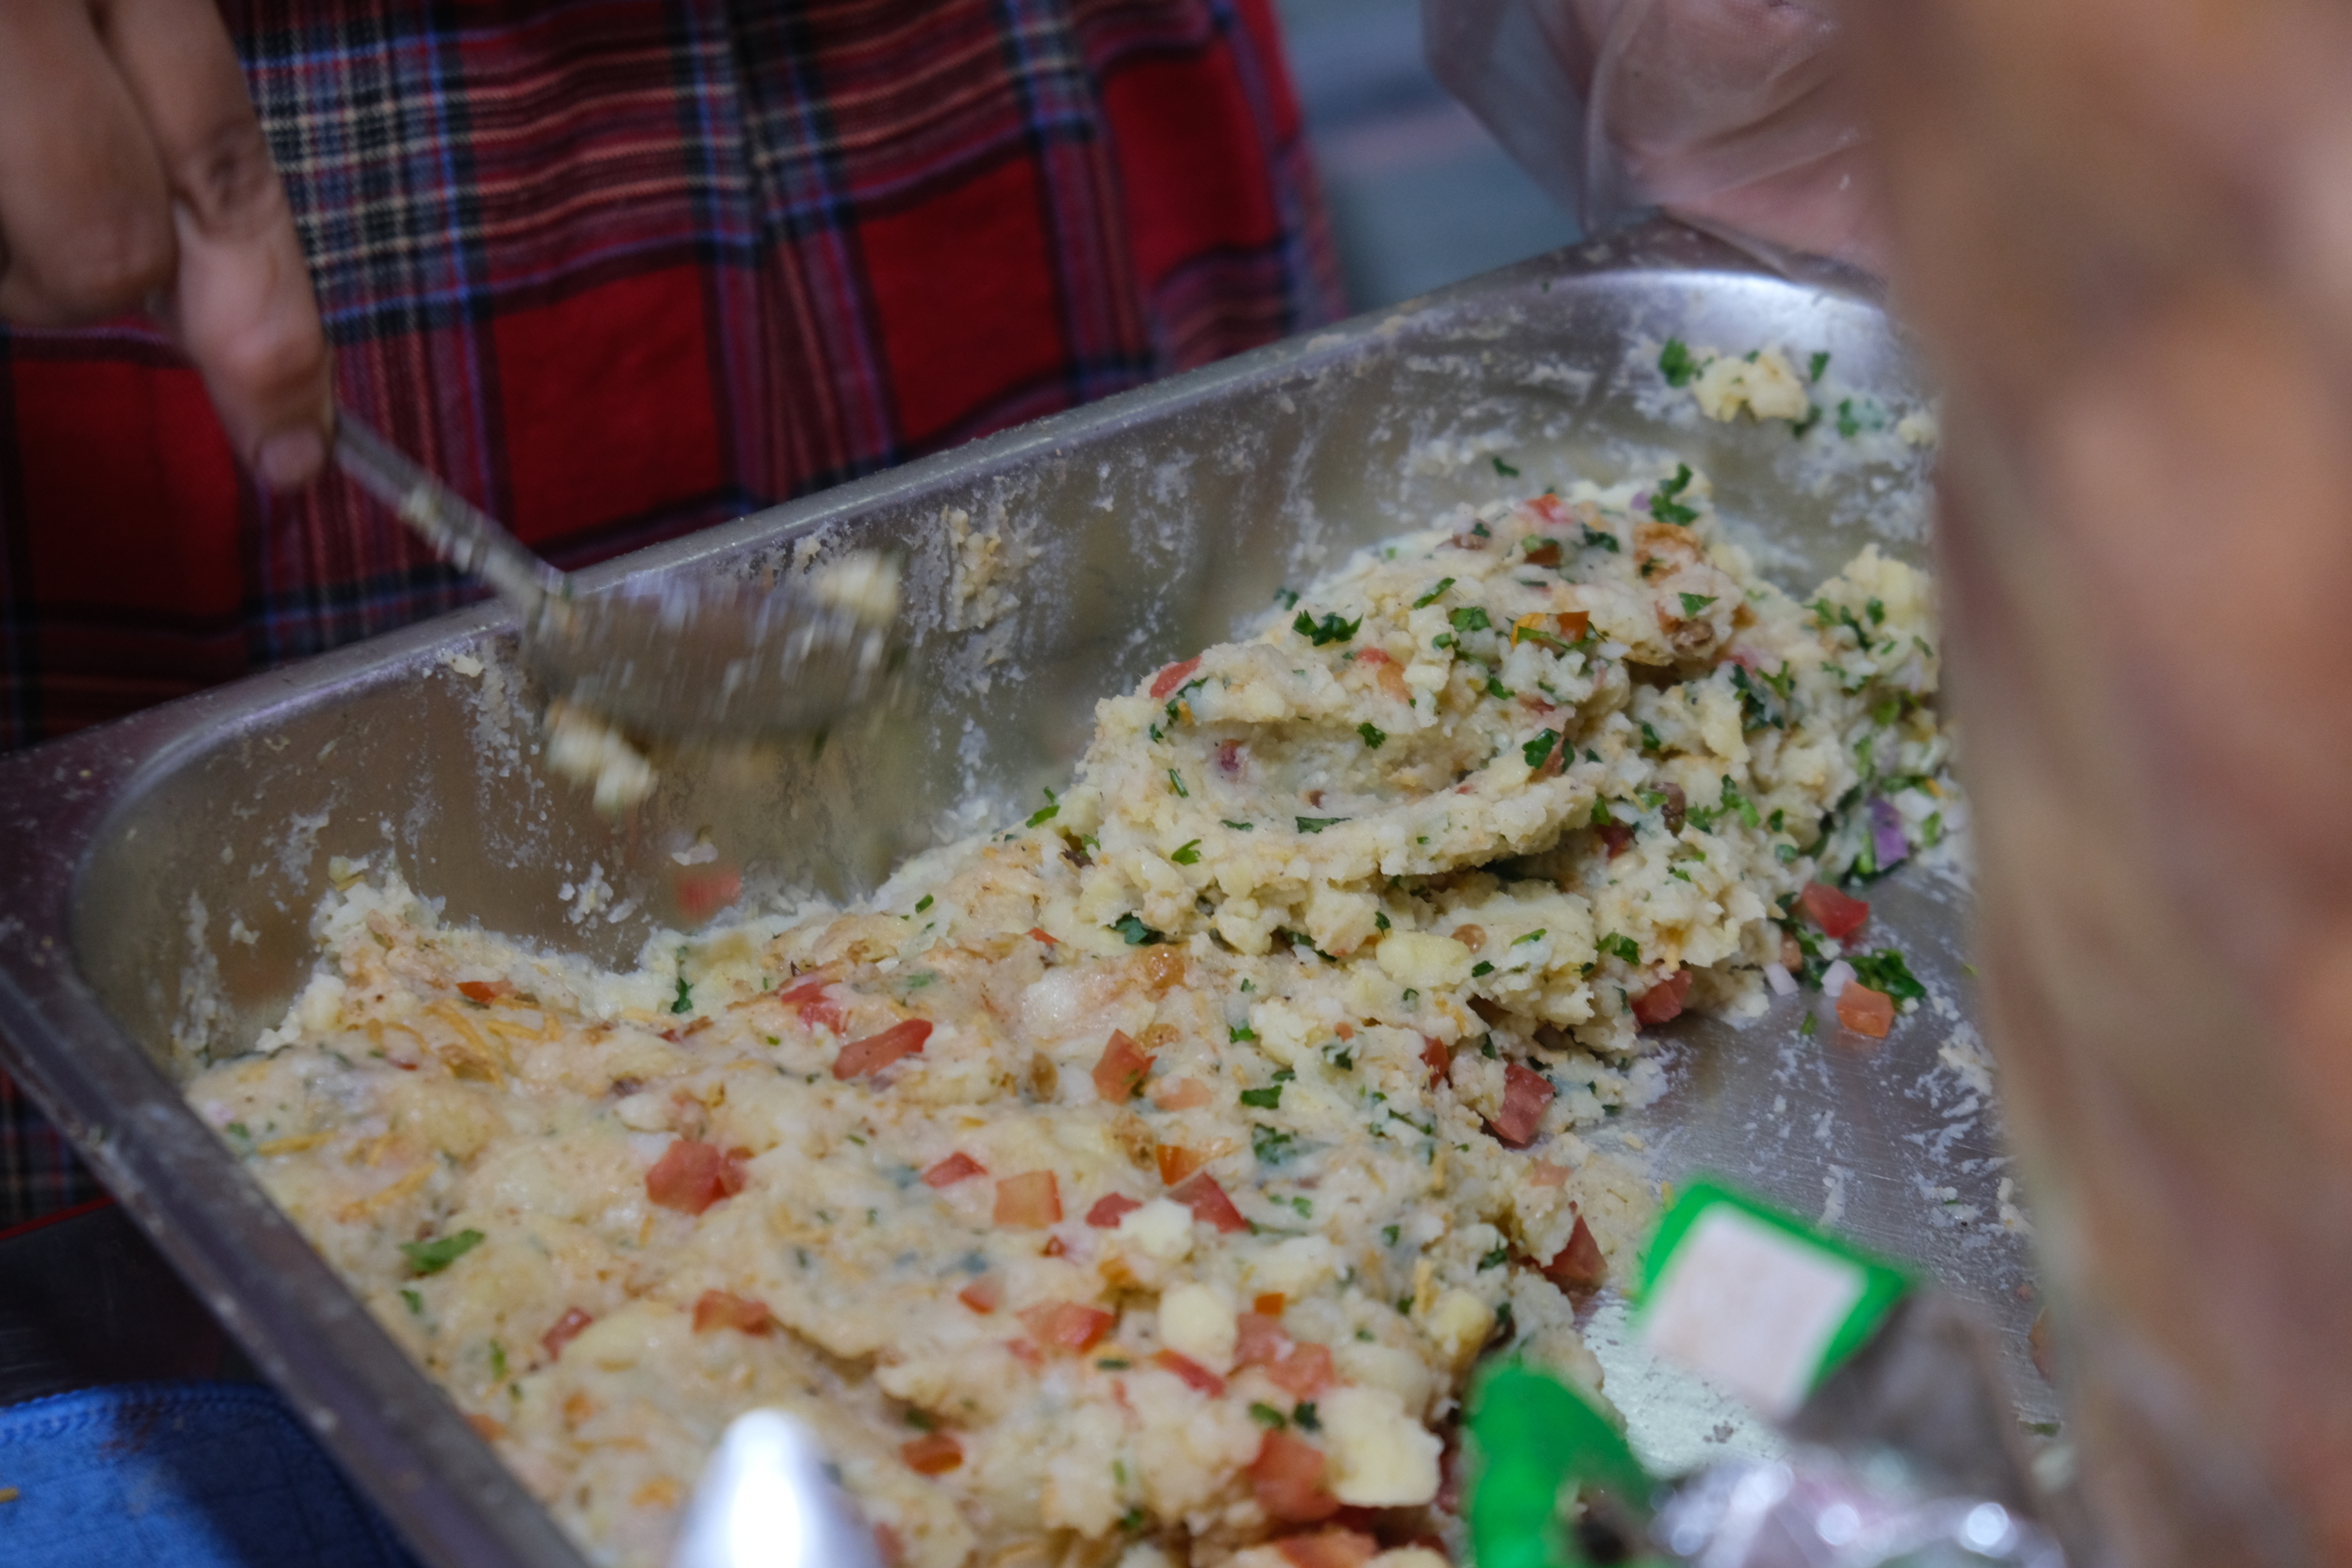 The filling is a mix of mashed potato, tomato, shallot, and Indian spices. Photo: Ngoc Phuong / Tuoi Tre News